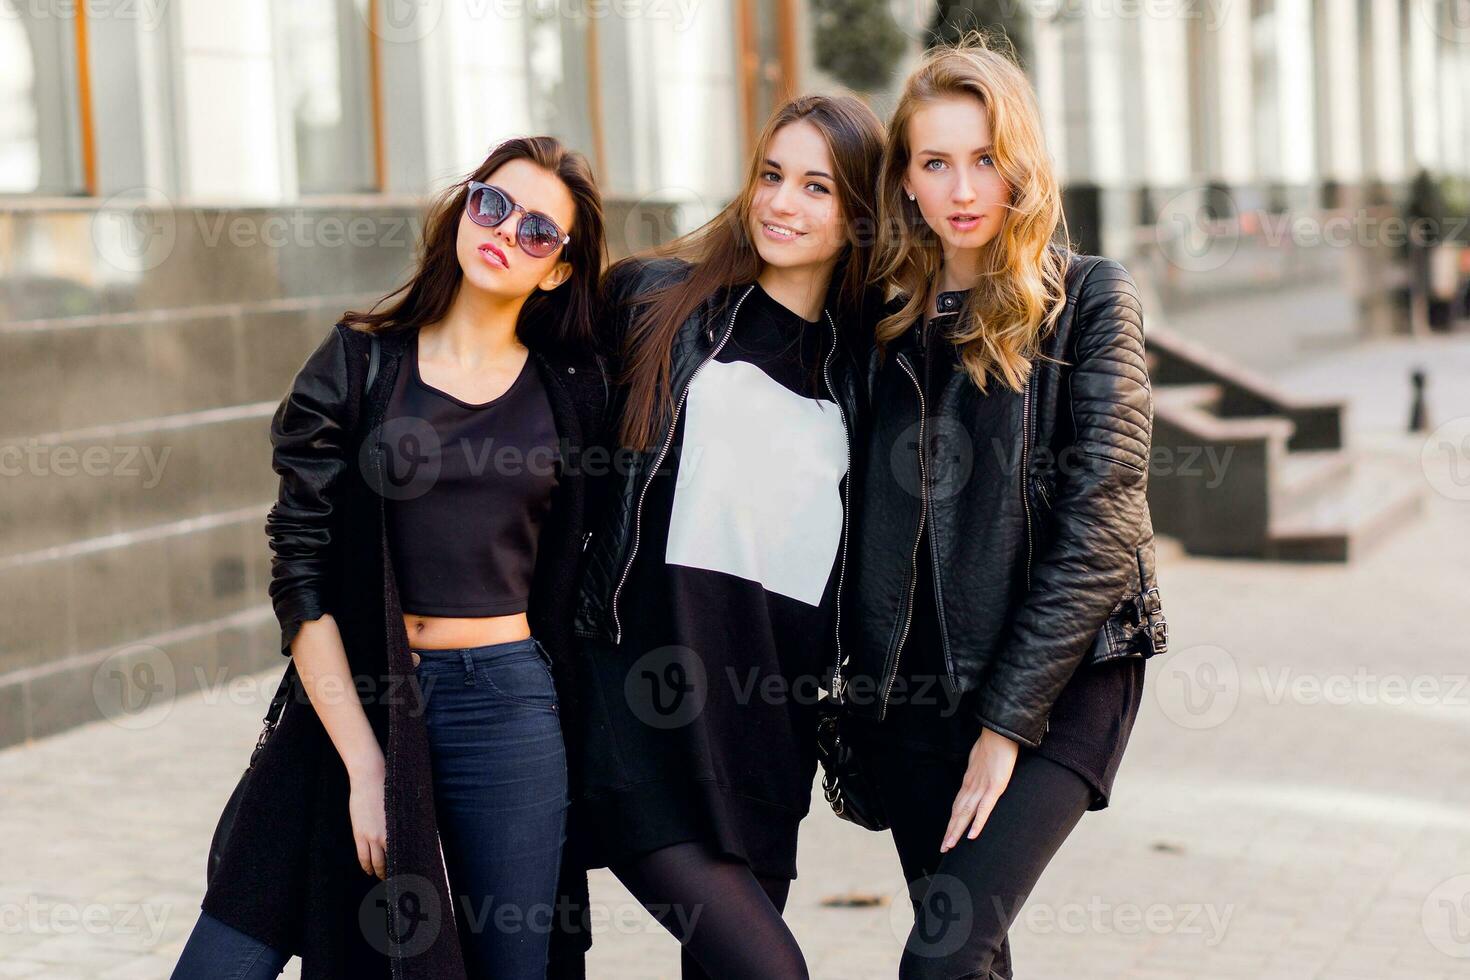 Three pretty  young girls having fun outdoors together . Lifestyle urban mood.  Center city background. Best friends wearing black casual outfit. photo